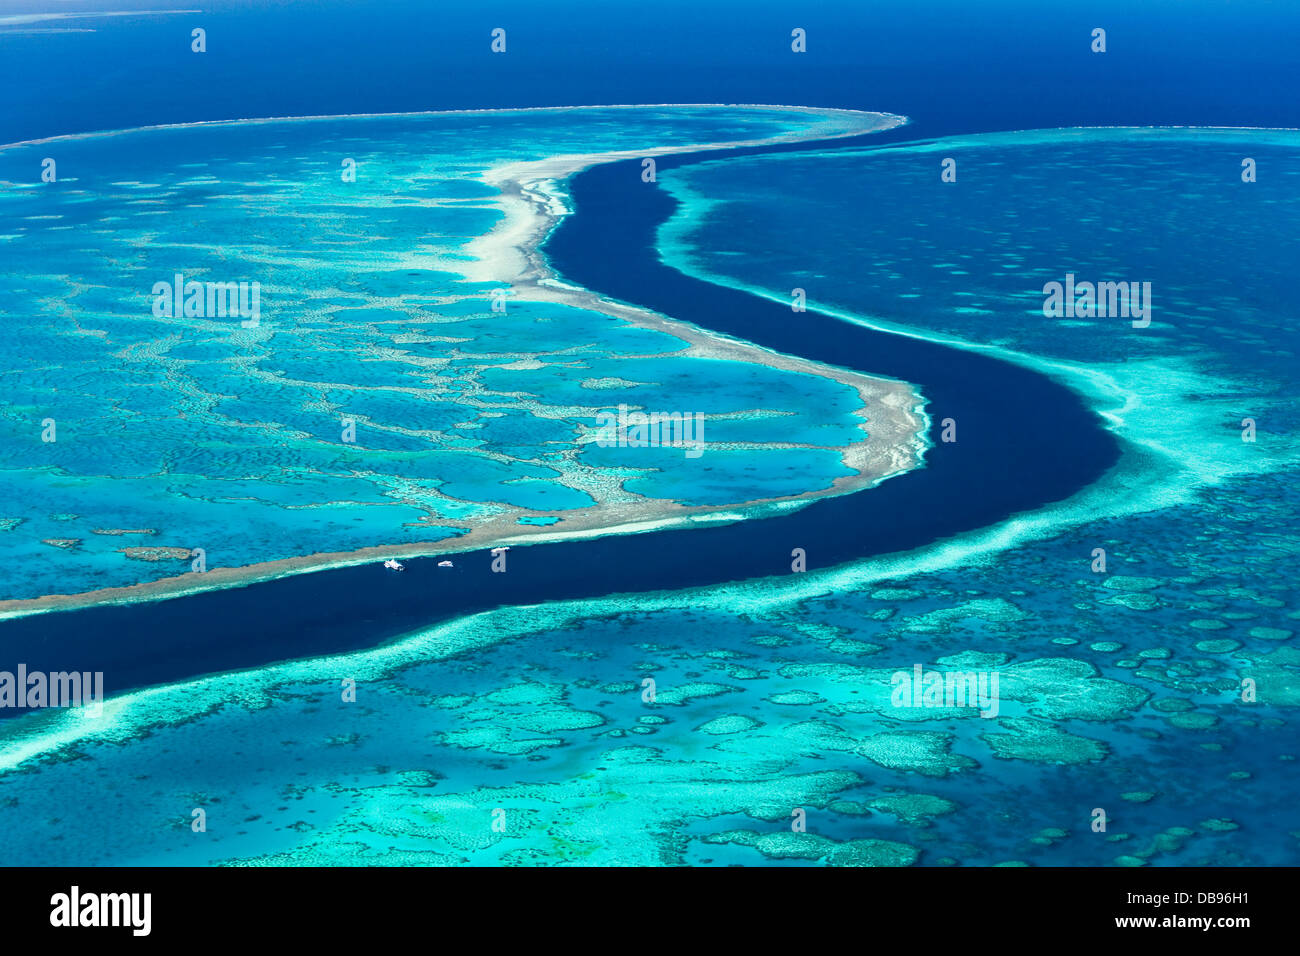 Aerial view of 'The River', a 200 ft deep channel running between Hardys Reef and Hook Reef. Great Barrier Reef Marine Park Stock Photo